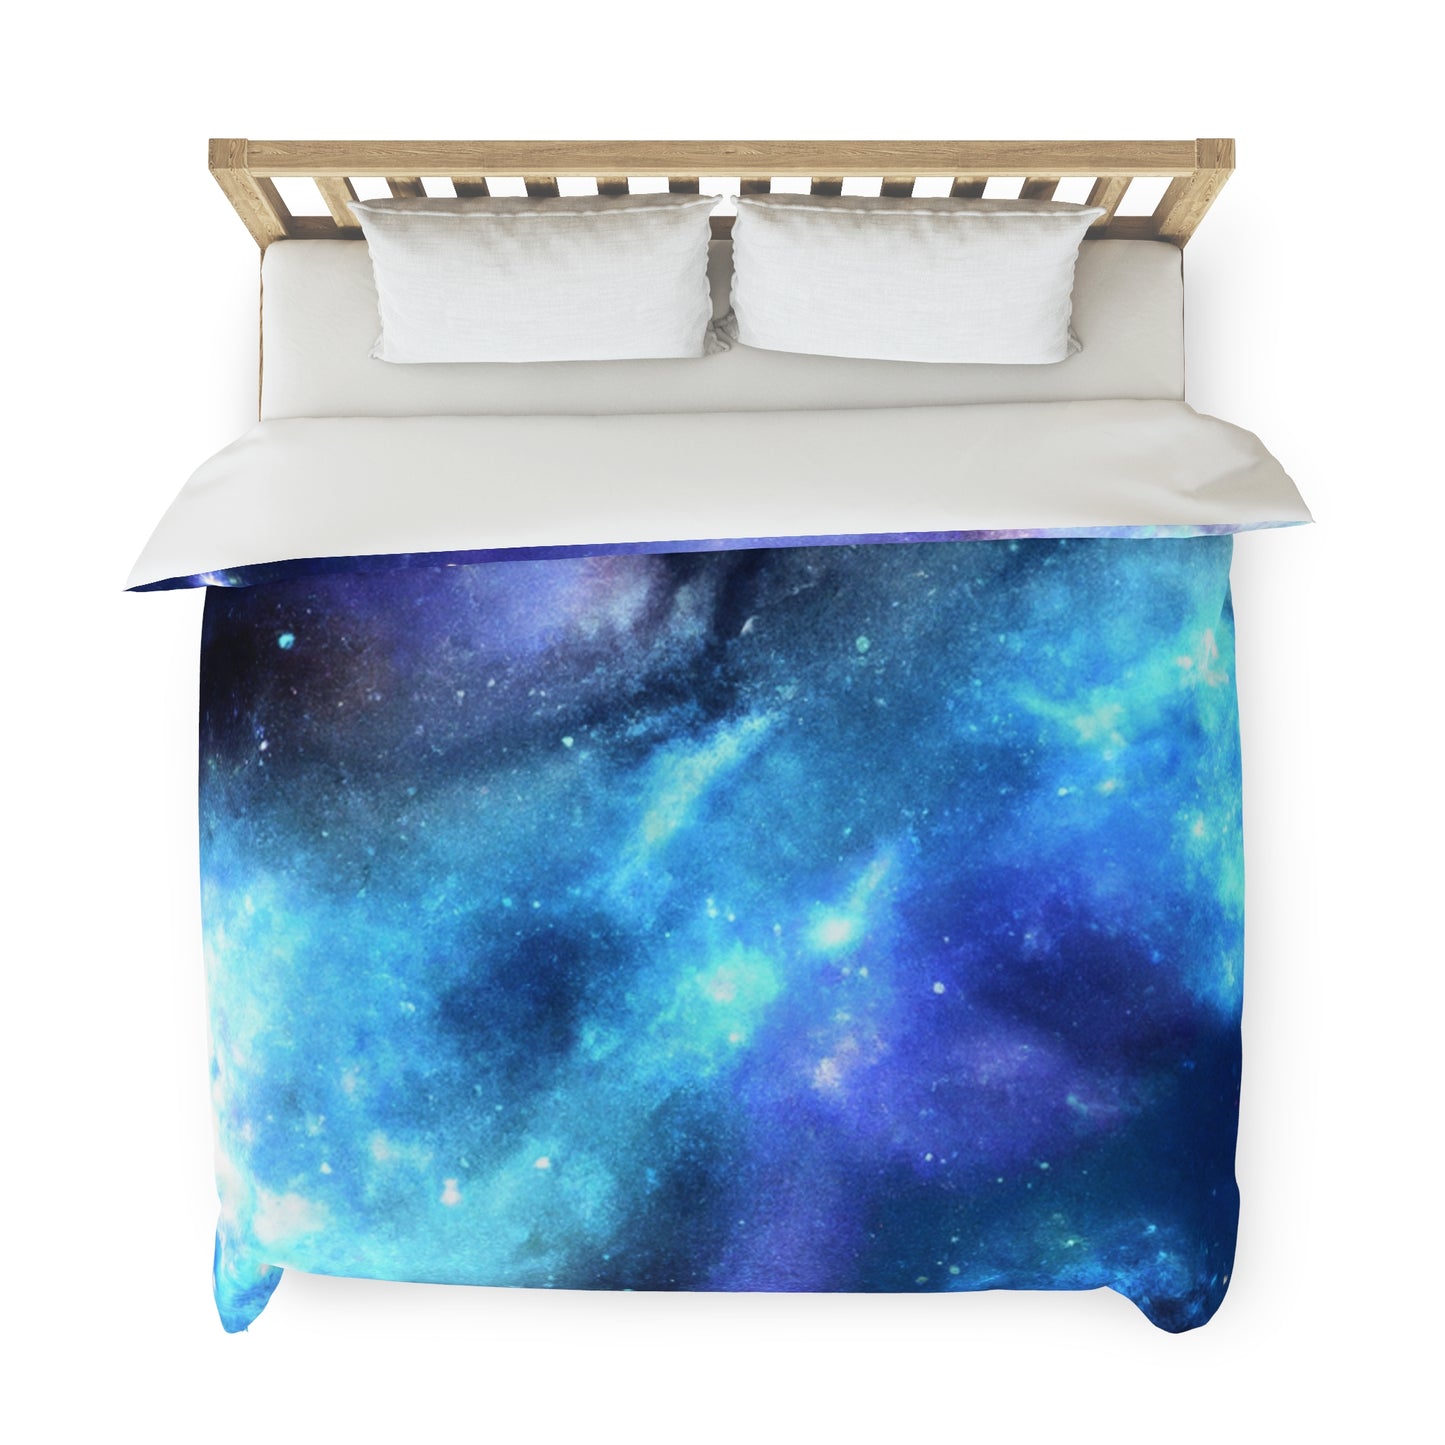 Dance with Dreamy Bobby - Astronomy Duvet Bed Cover